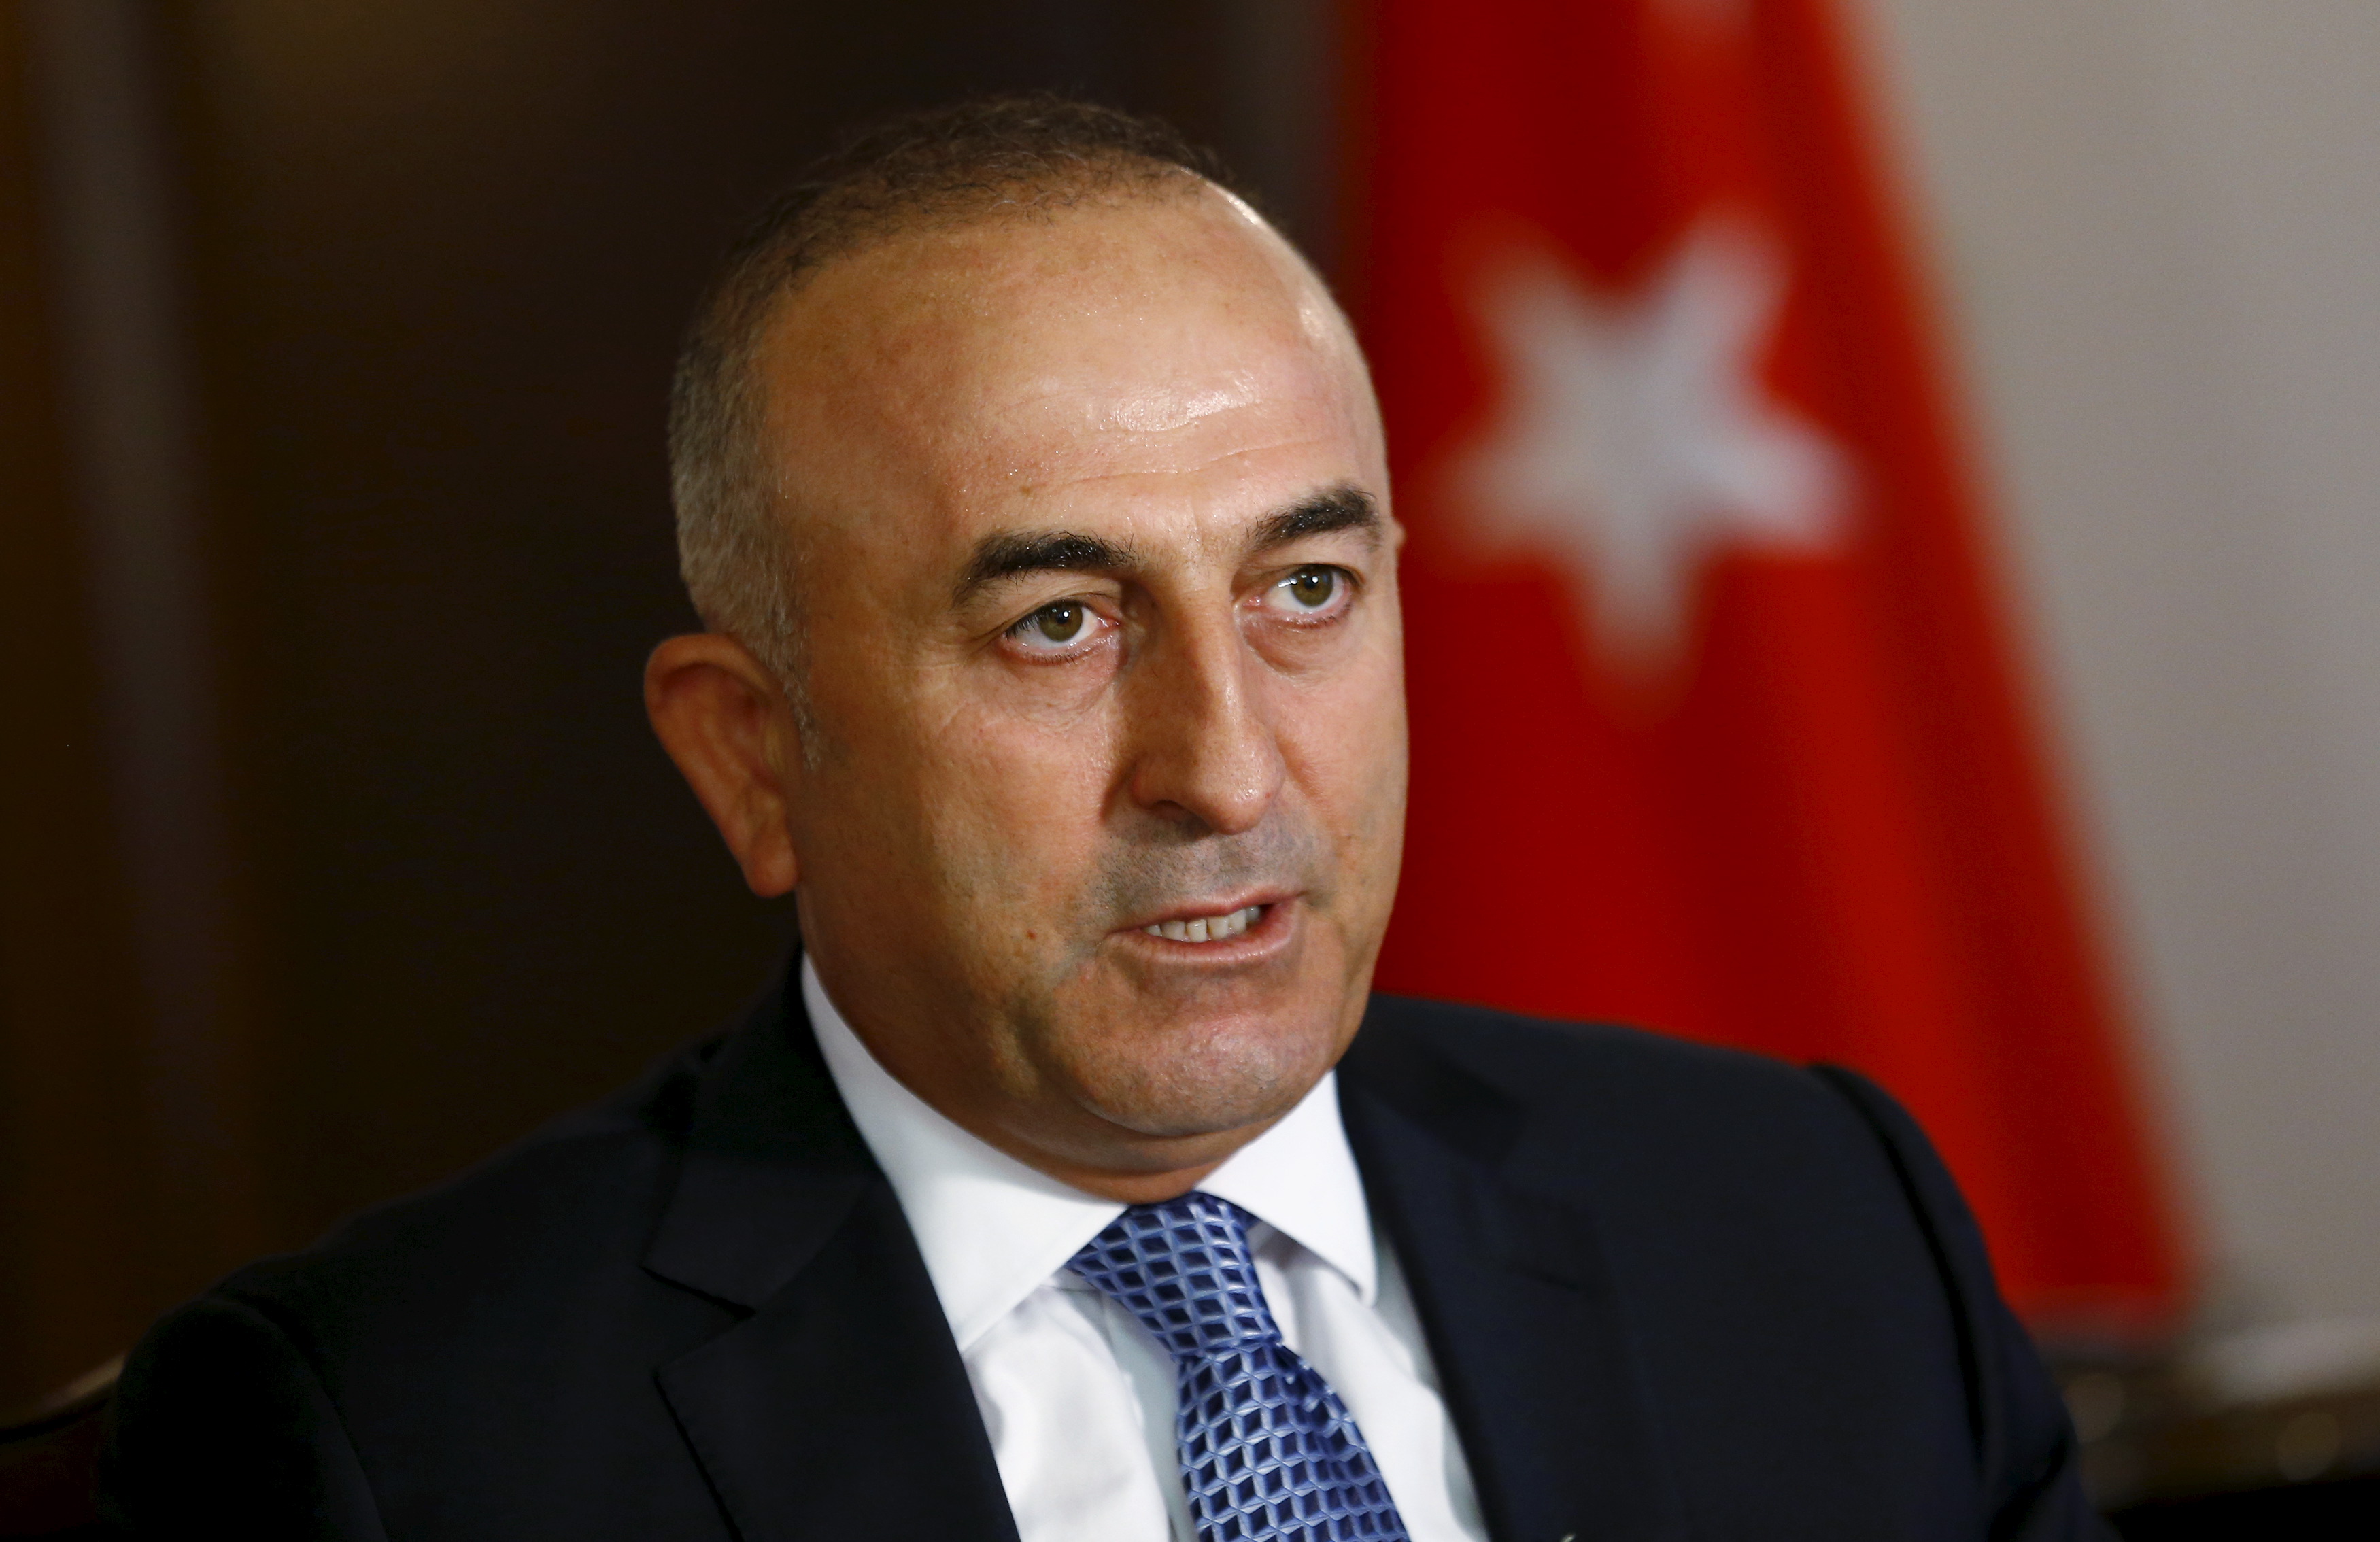 Turkey's Foreign Minister Mevlut Cavusoglu answers a question during an interview in Ankara on Aug. 24, 2015 (Umit Bektas—Reuters)